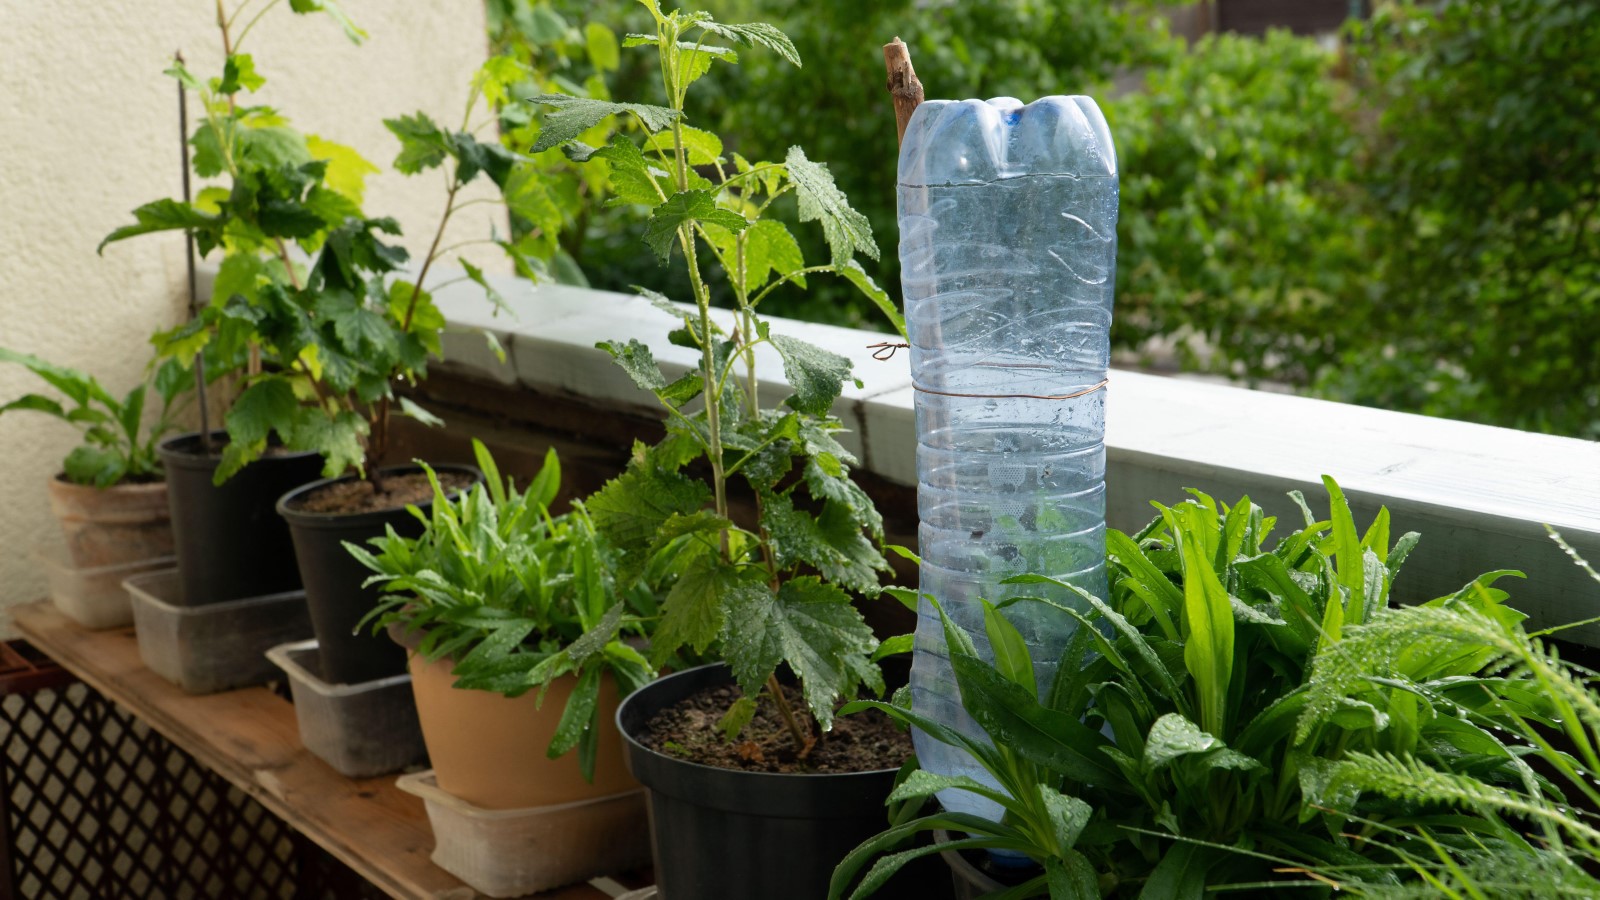 DIY garden watering system ideas to keep plants hydrated